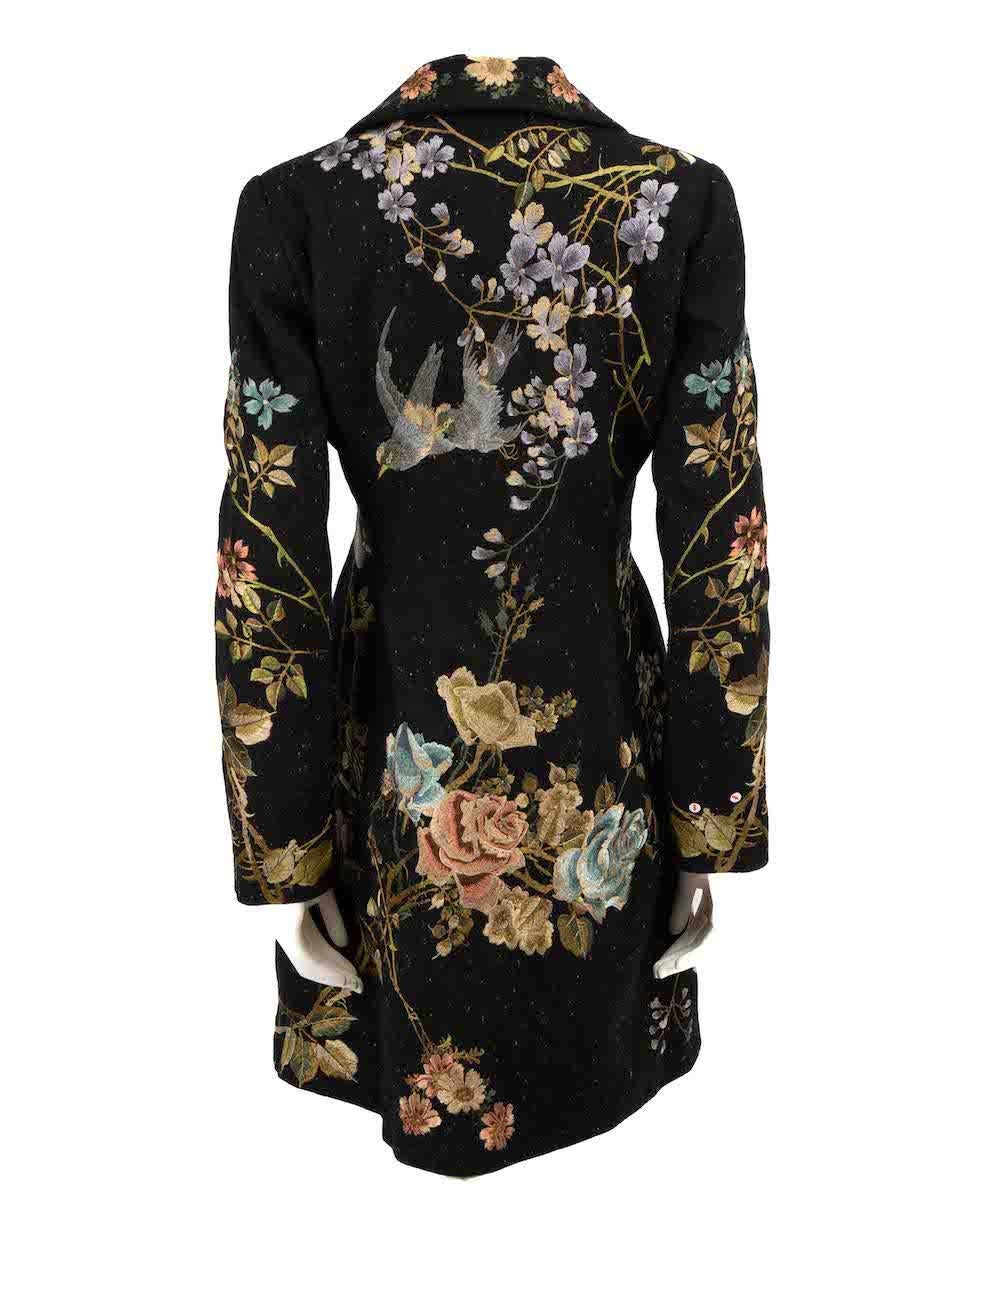 Biya Black Wool Floral Mid Length Coat Size S In Good Condition For Sale In London, GB